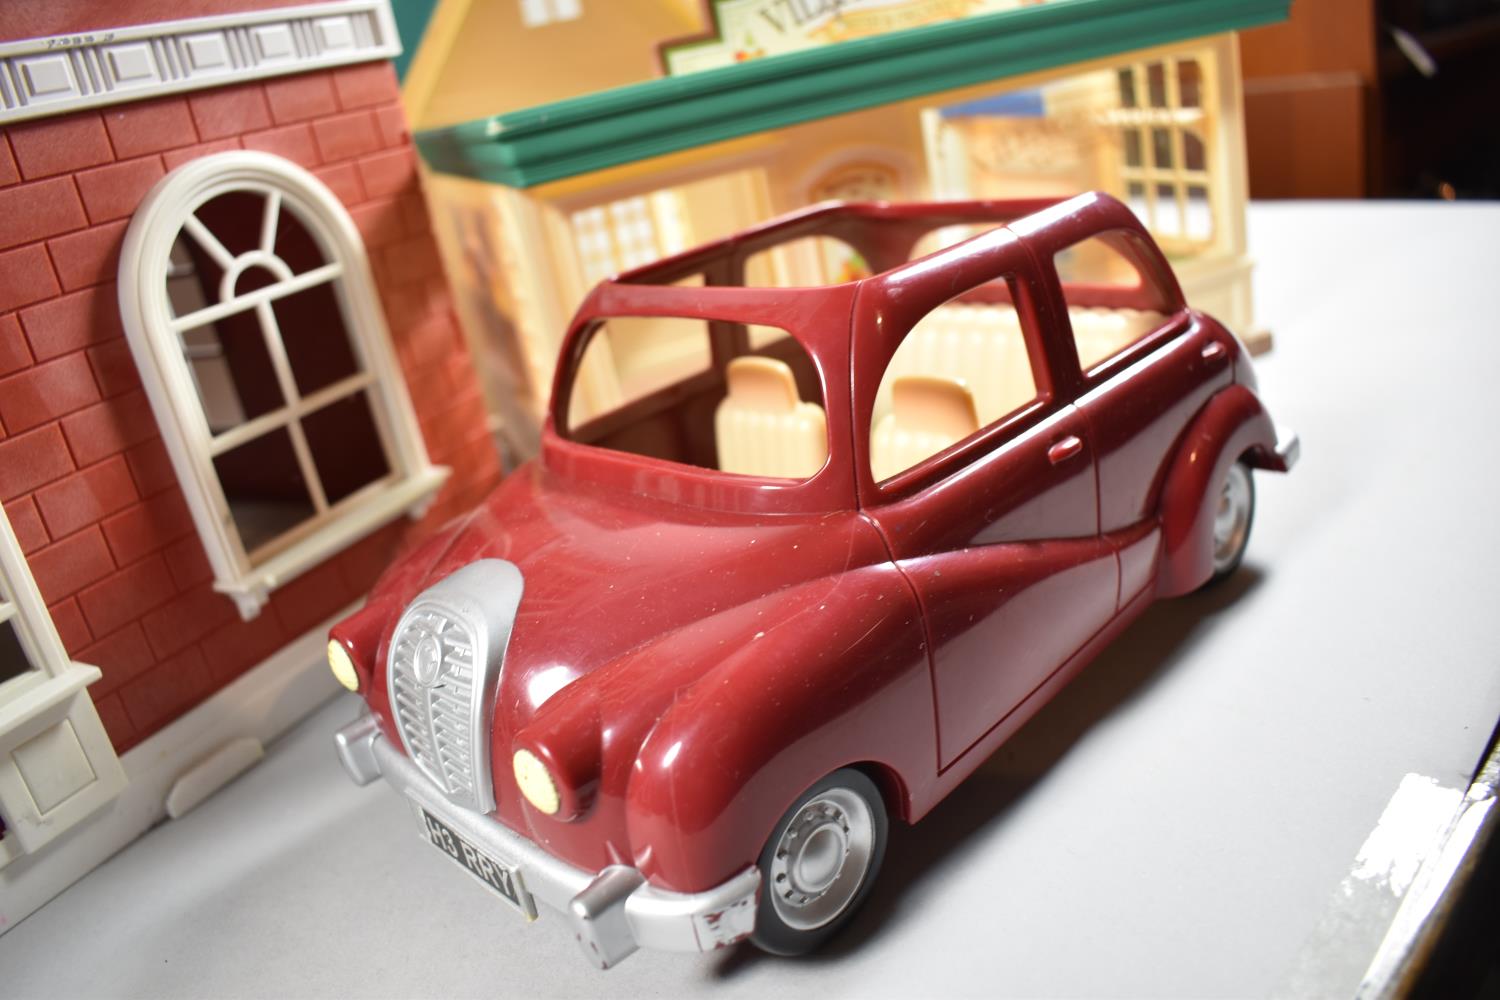 A Sylvanian Families Dolls House, Model Car and Village Store, Dolls House 47cm wide - Image 2 of 5